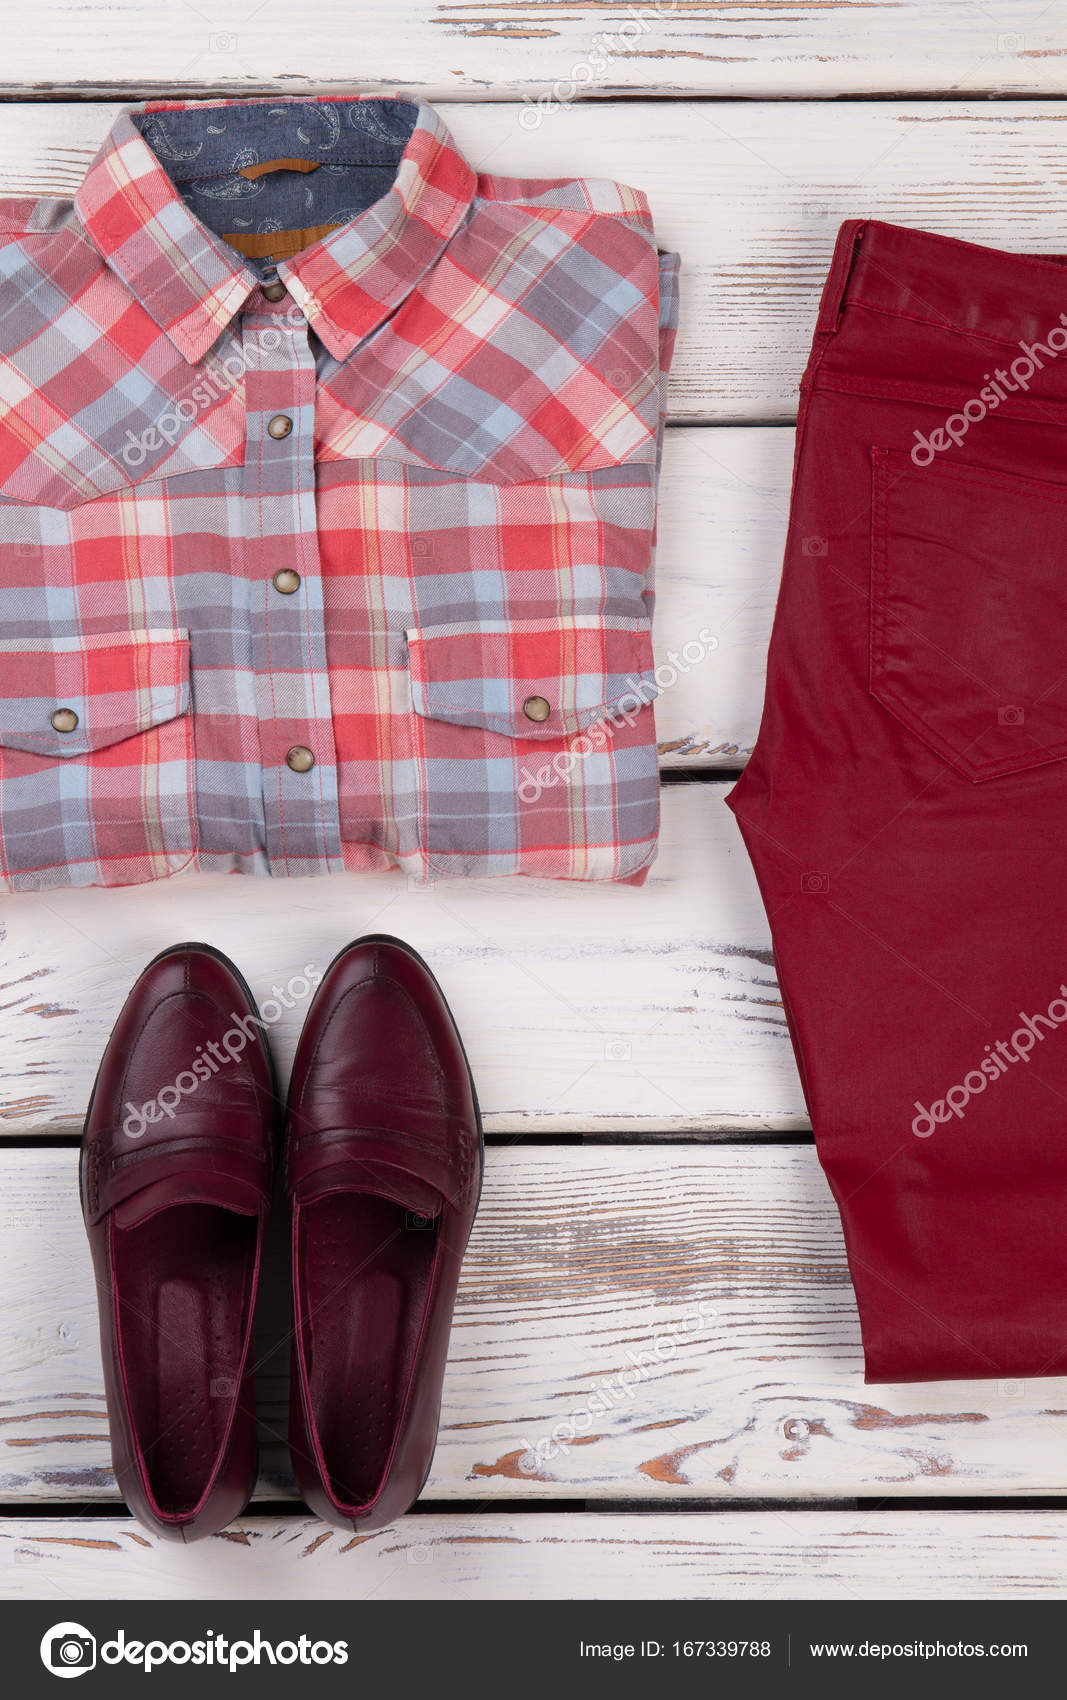 red shirt and jeans outfit